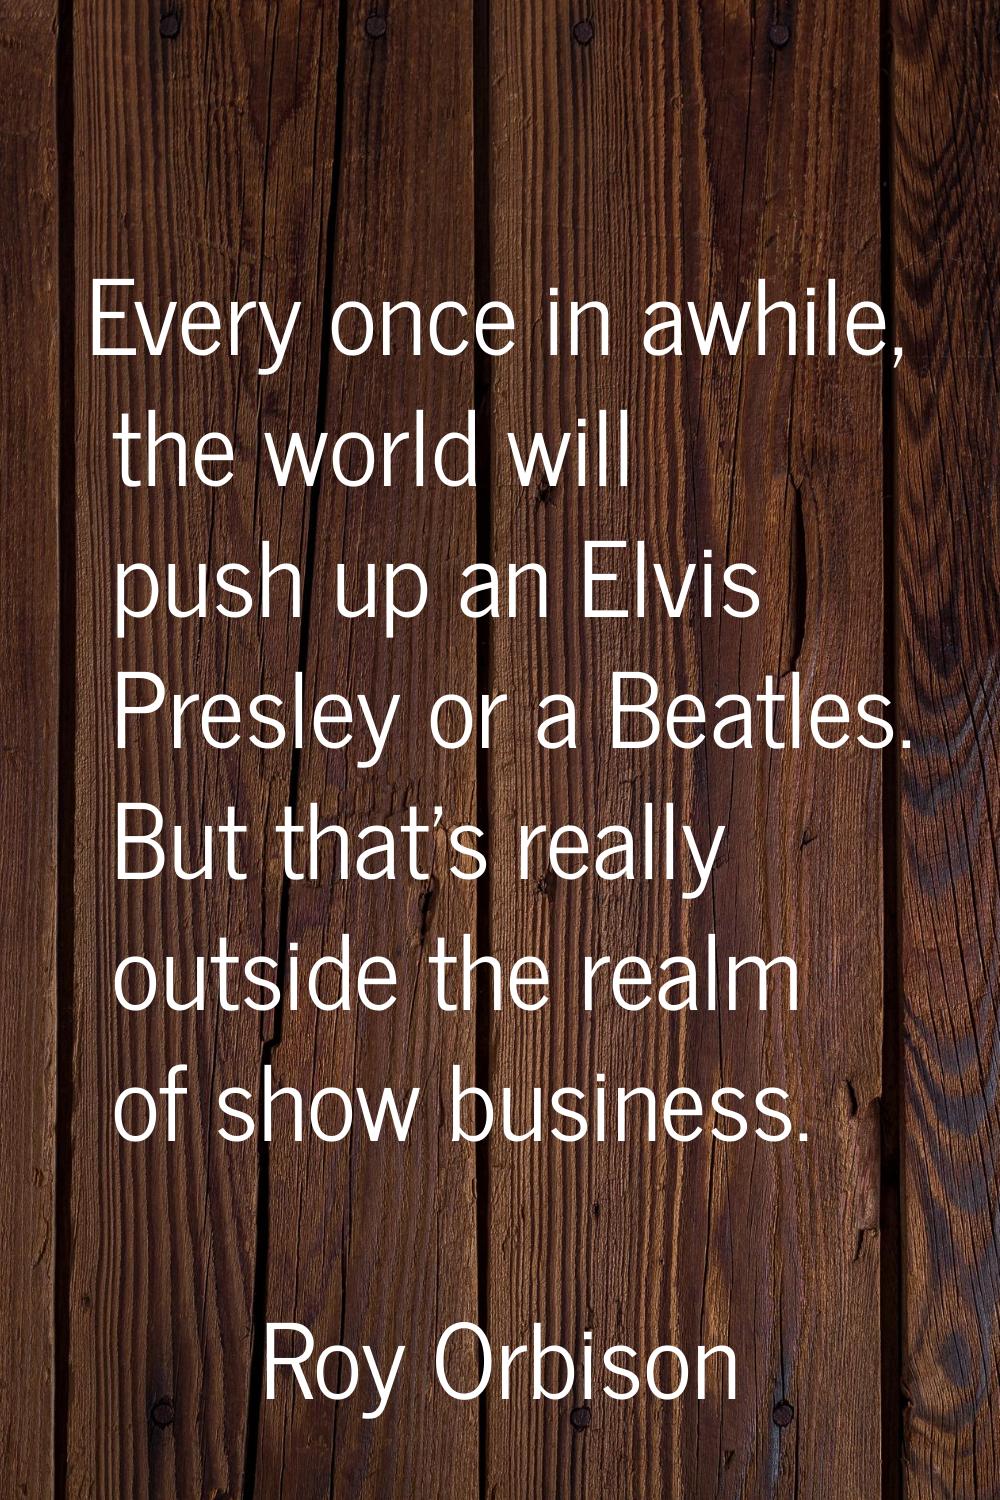 Every once in awhile, the world will push up an Elvis Presley or a Beatles. But that's really outsi